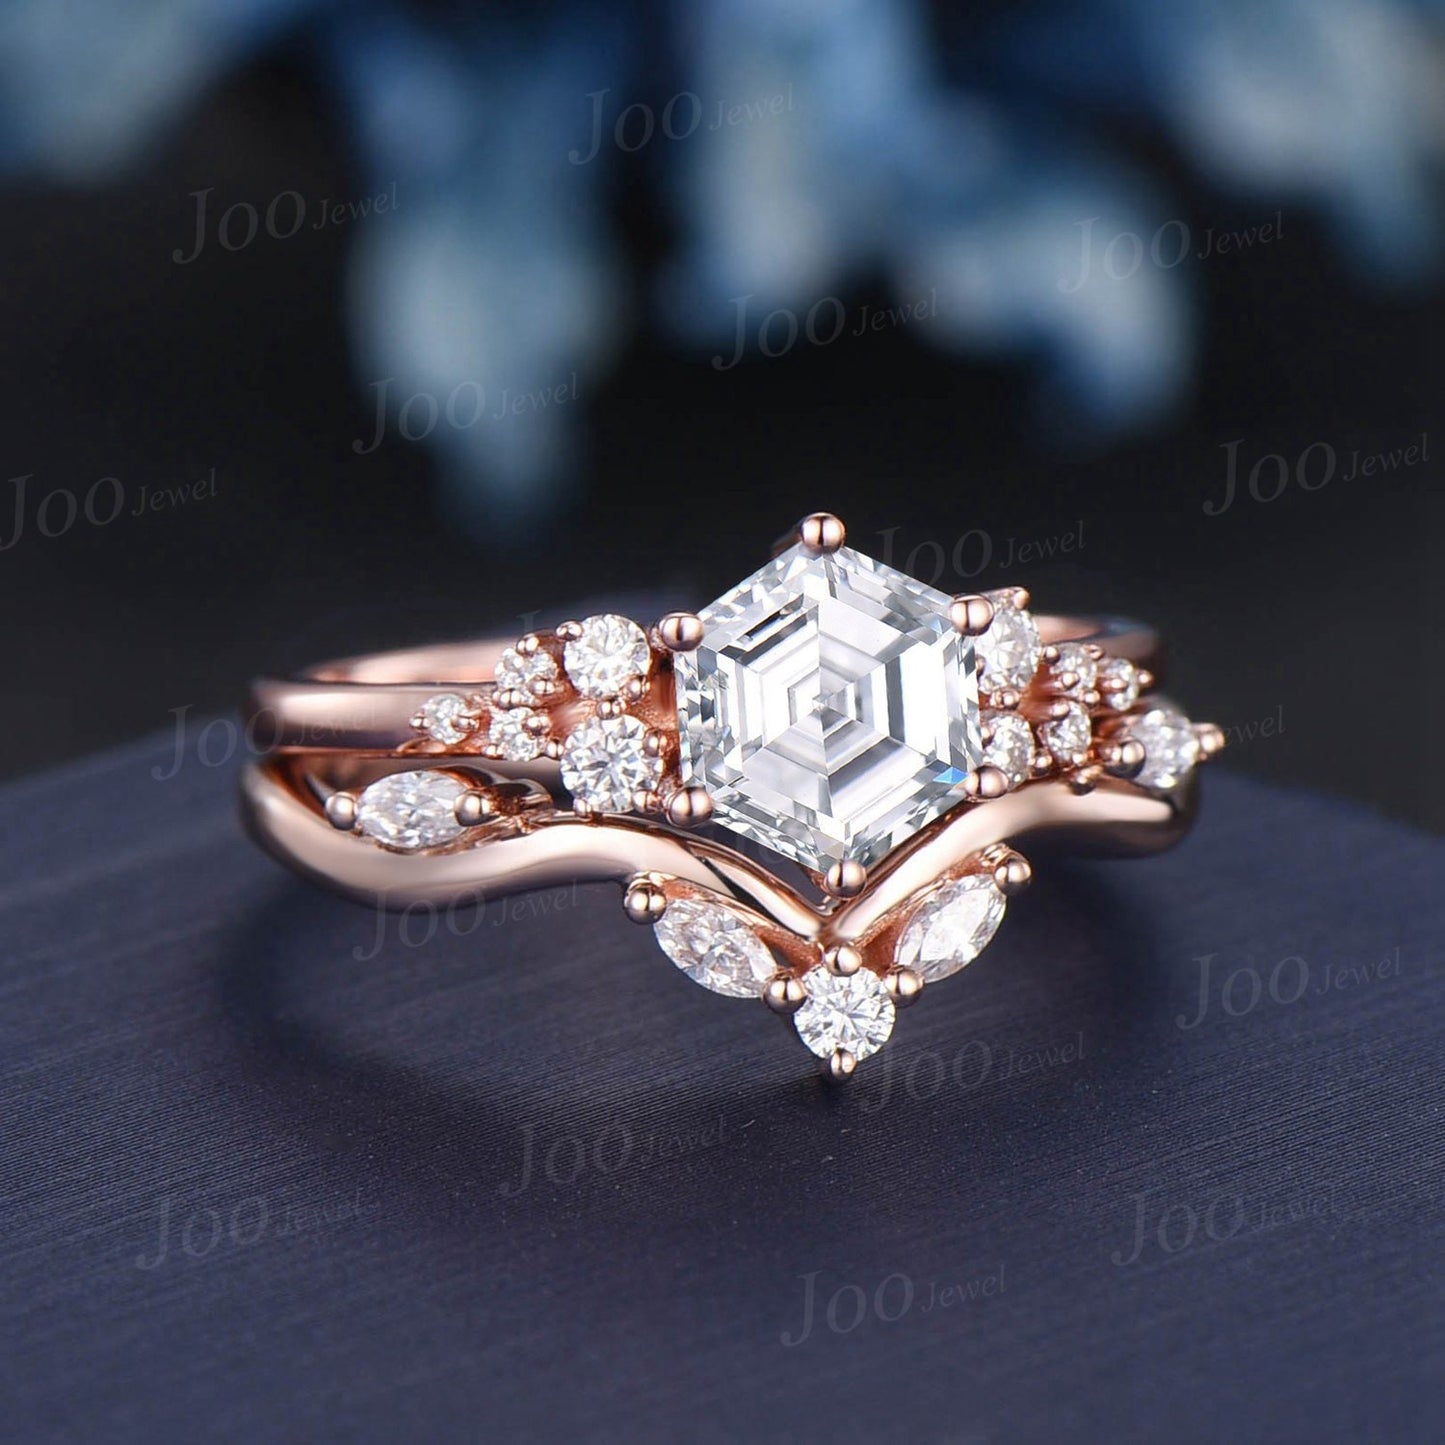 1ct Hexagon Cut Moissanite Diamond Engagement Ring Set Vintage Marquise Moissanite Curved Wedding Band Unique Snowdrift Cluster Wedding Ring